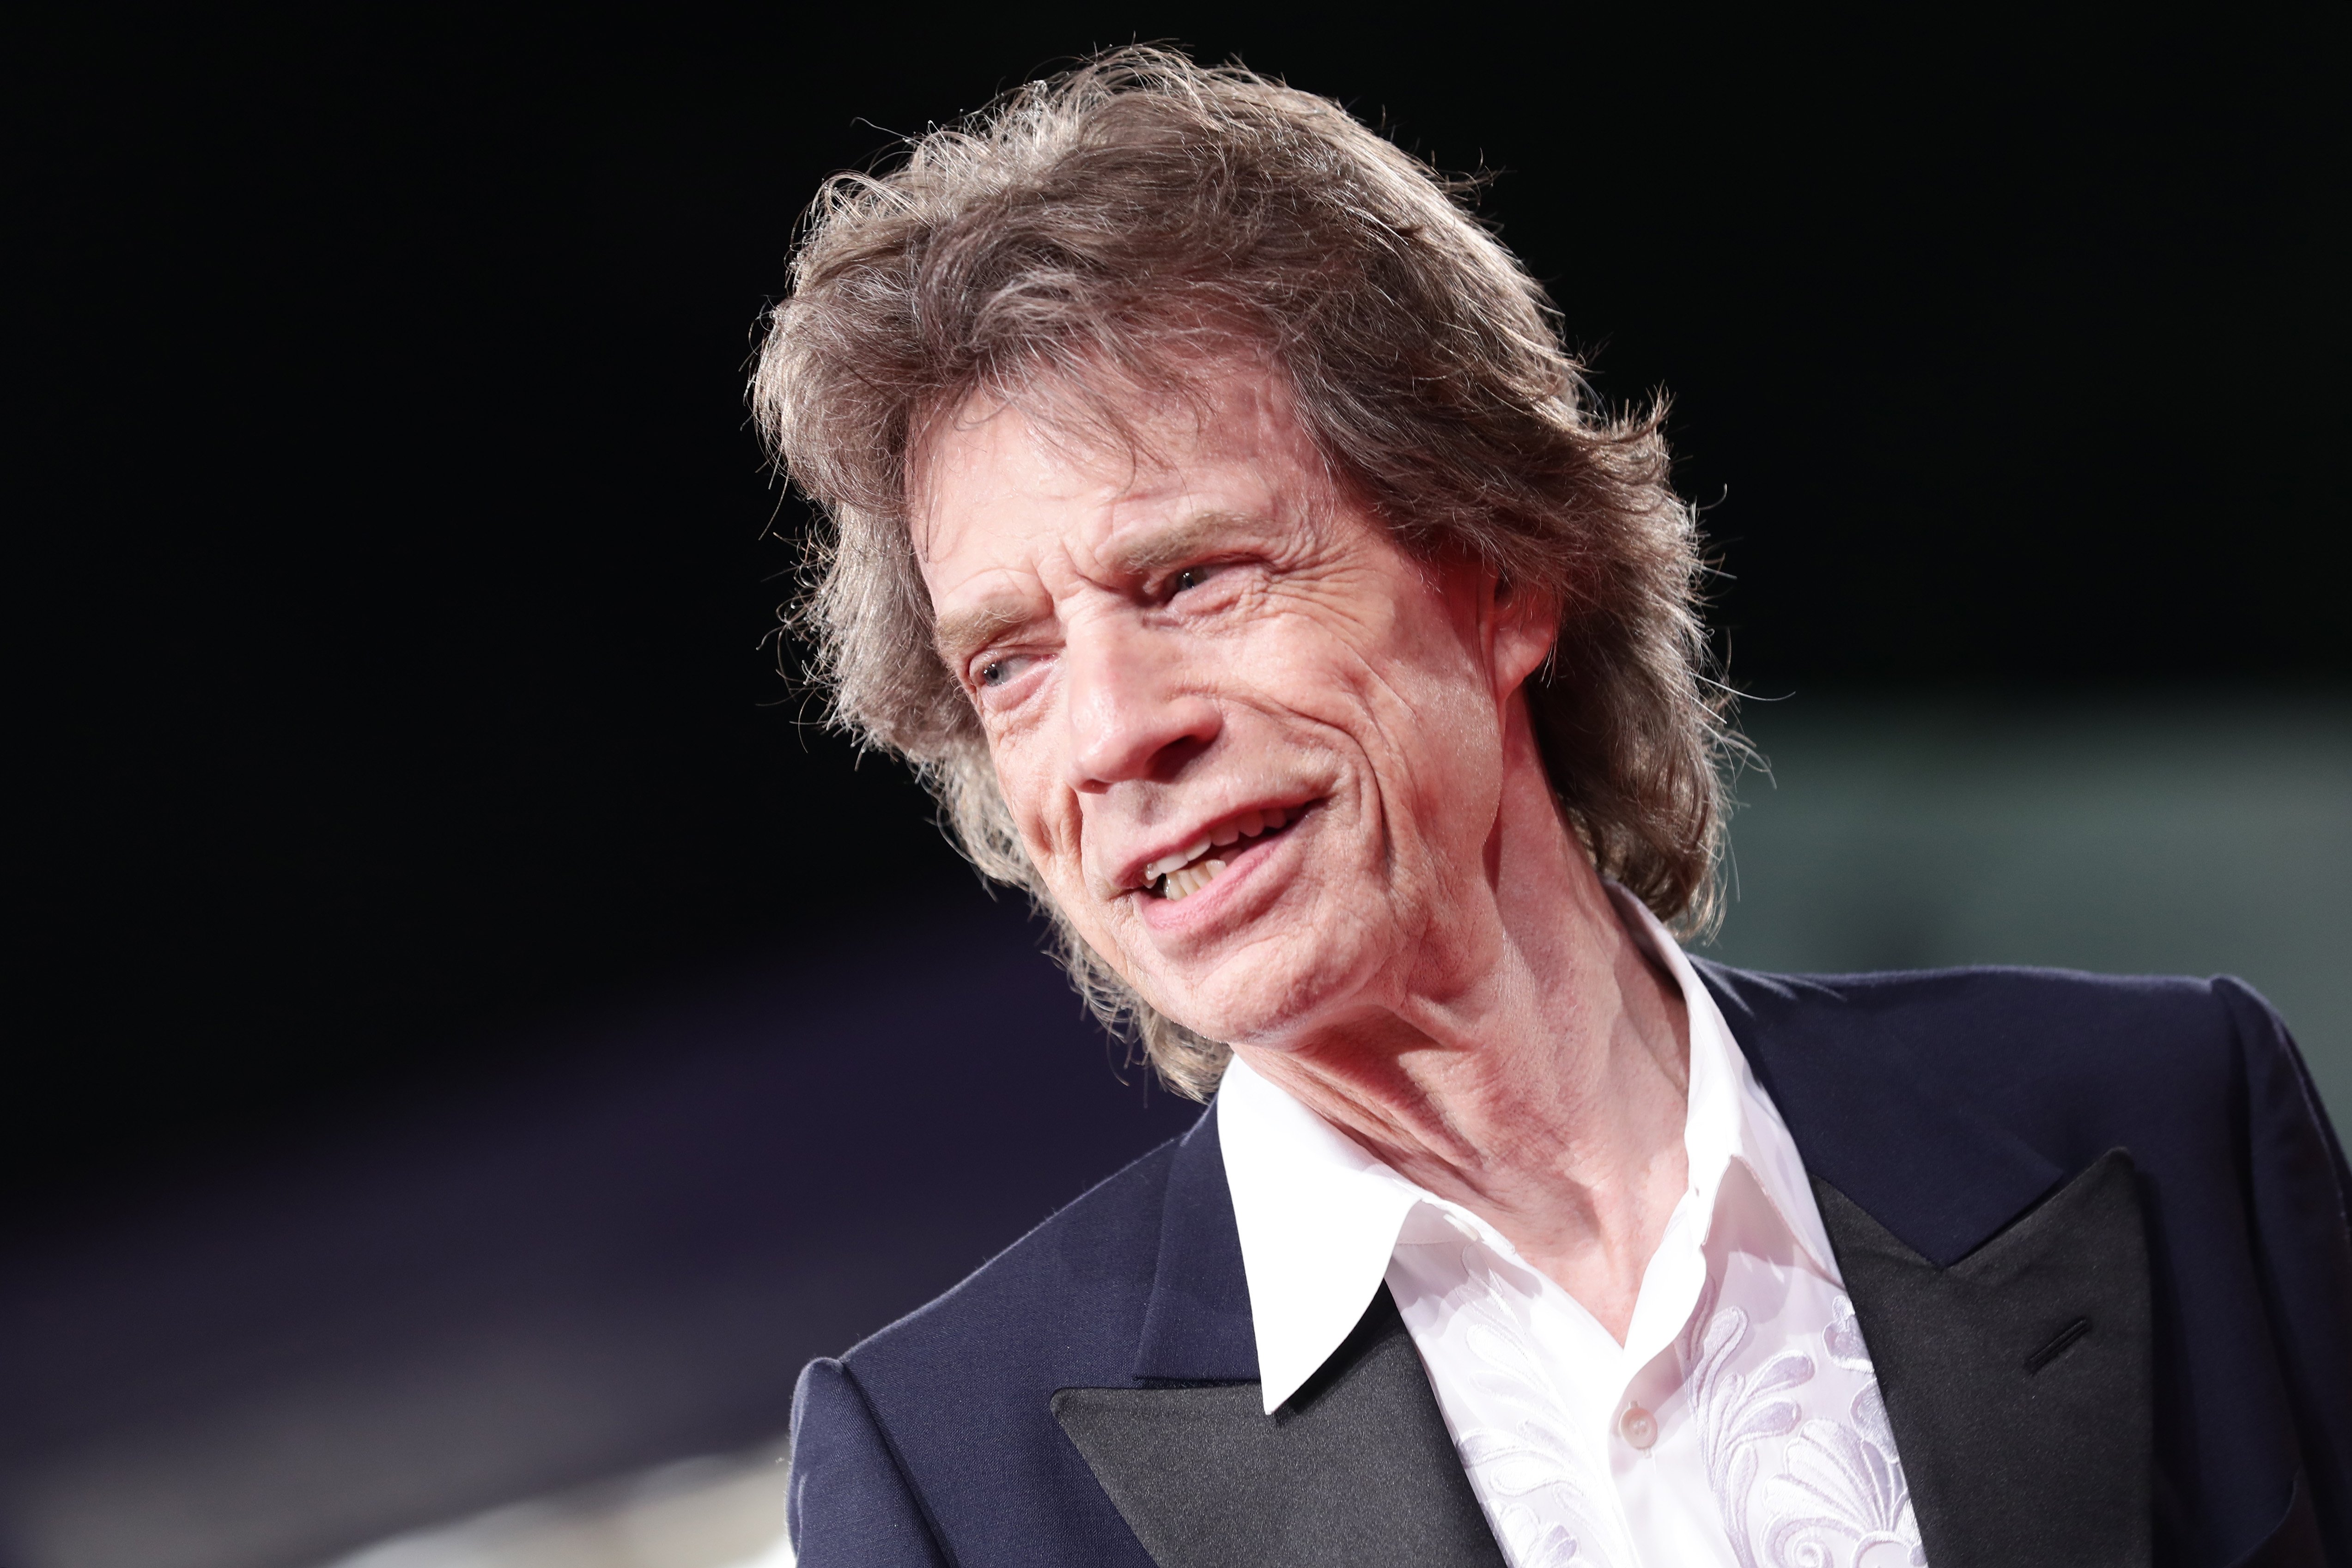 Mick Jagger at the 76th Venice Film Festival at Sala Grande on September 07, 2019 in Venice, Italy | Photo: Getty Images